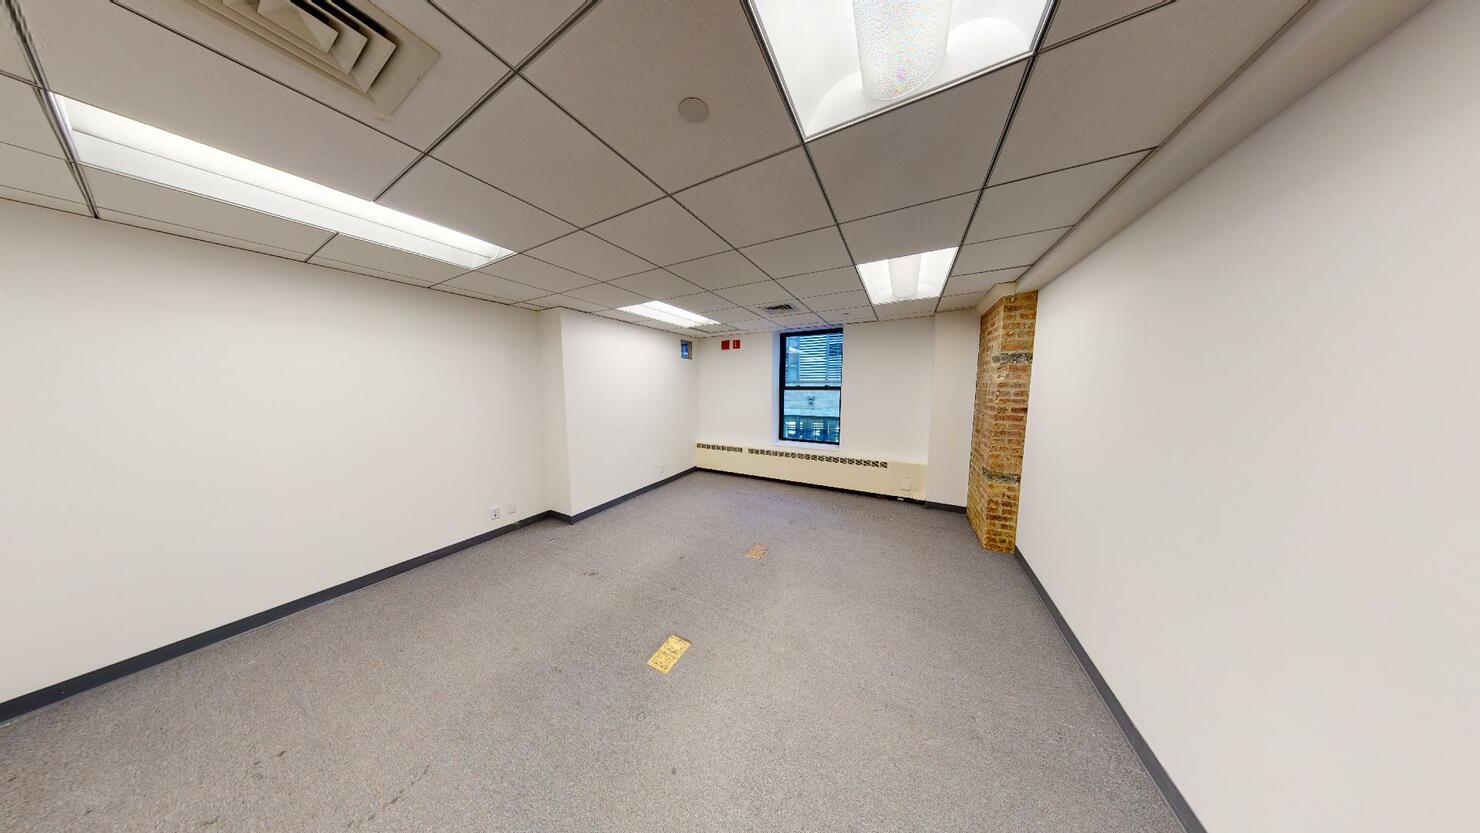 483 Tenth Avenue Office Space - Office Room with Floor Carpet and White Walls